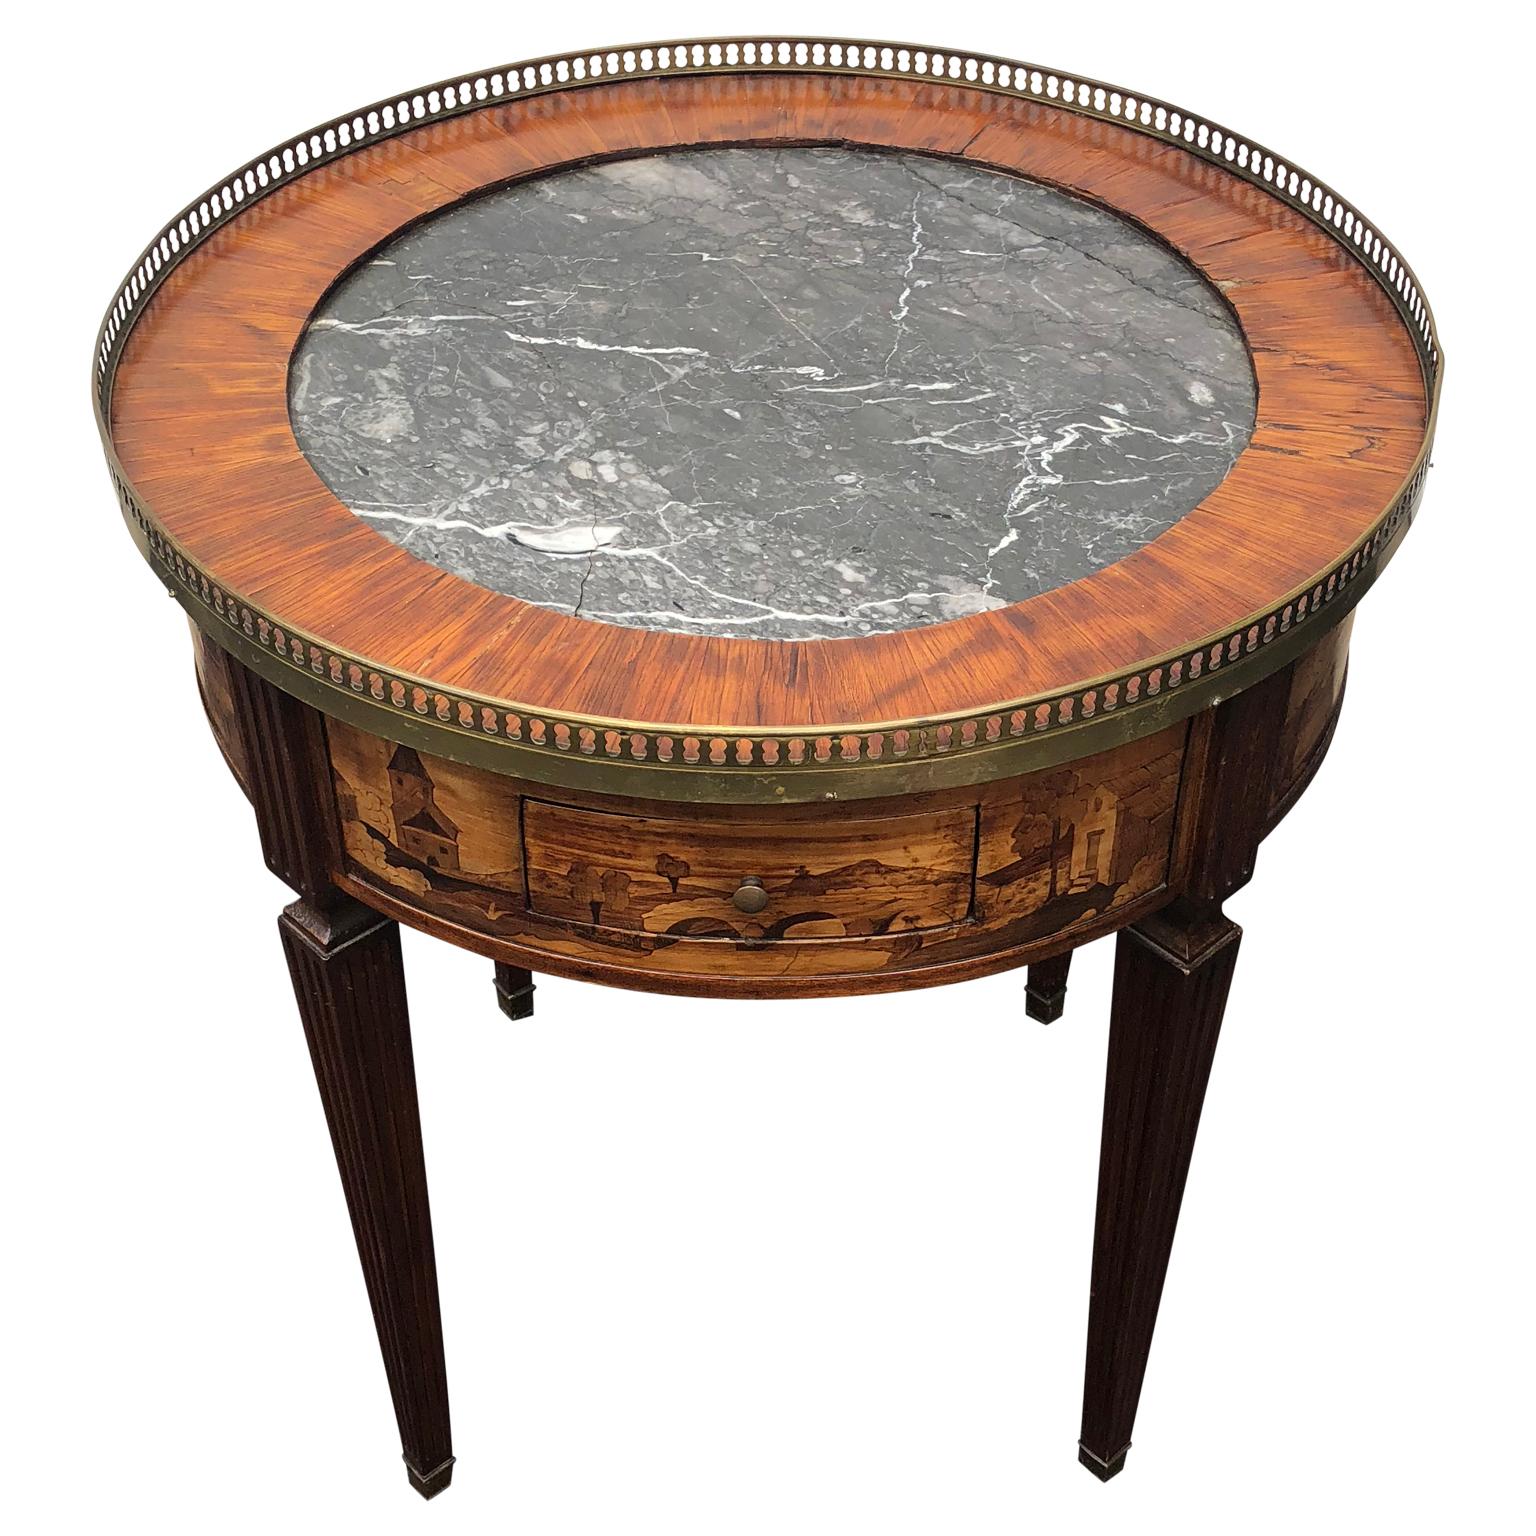 Mid-19th Century Louis XVI French marquetry Bouillotte table.
The amazing French marquetry pattern is represented with architecture and hunting scenes of satin and lemon wood.